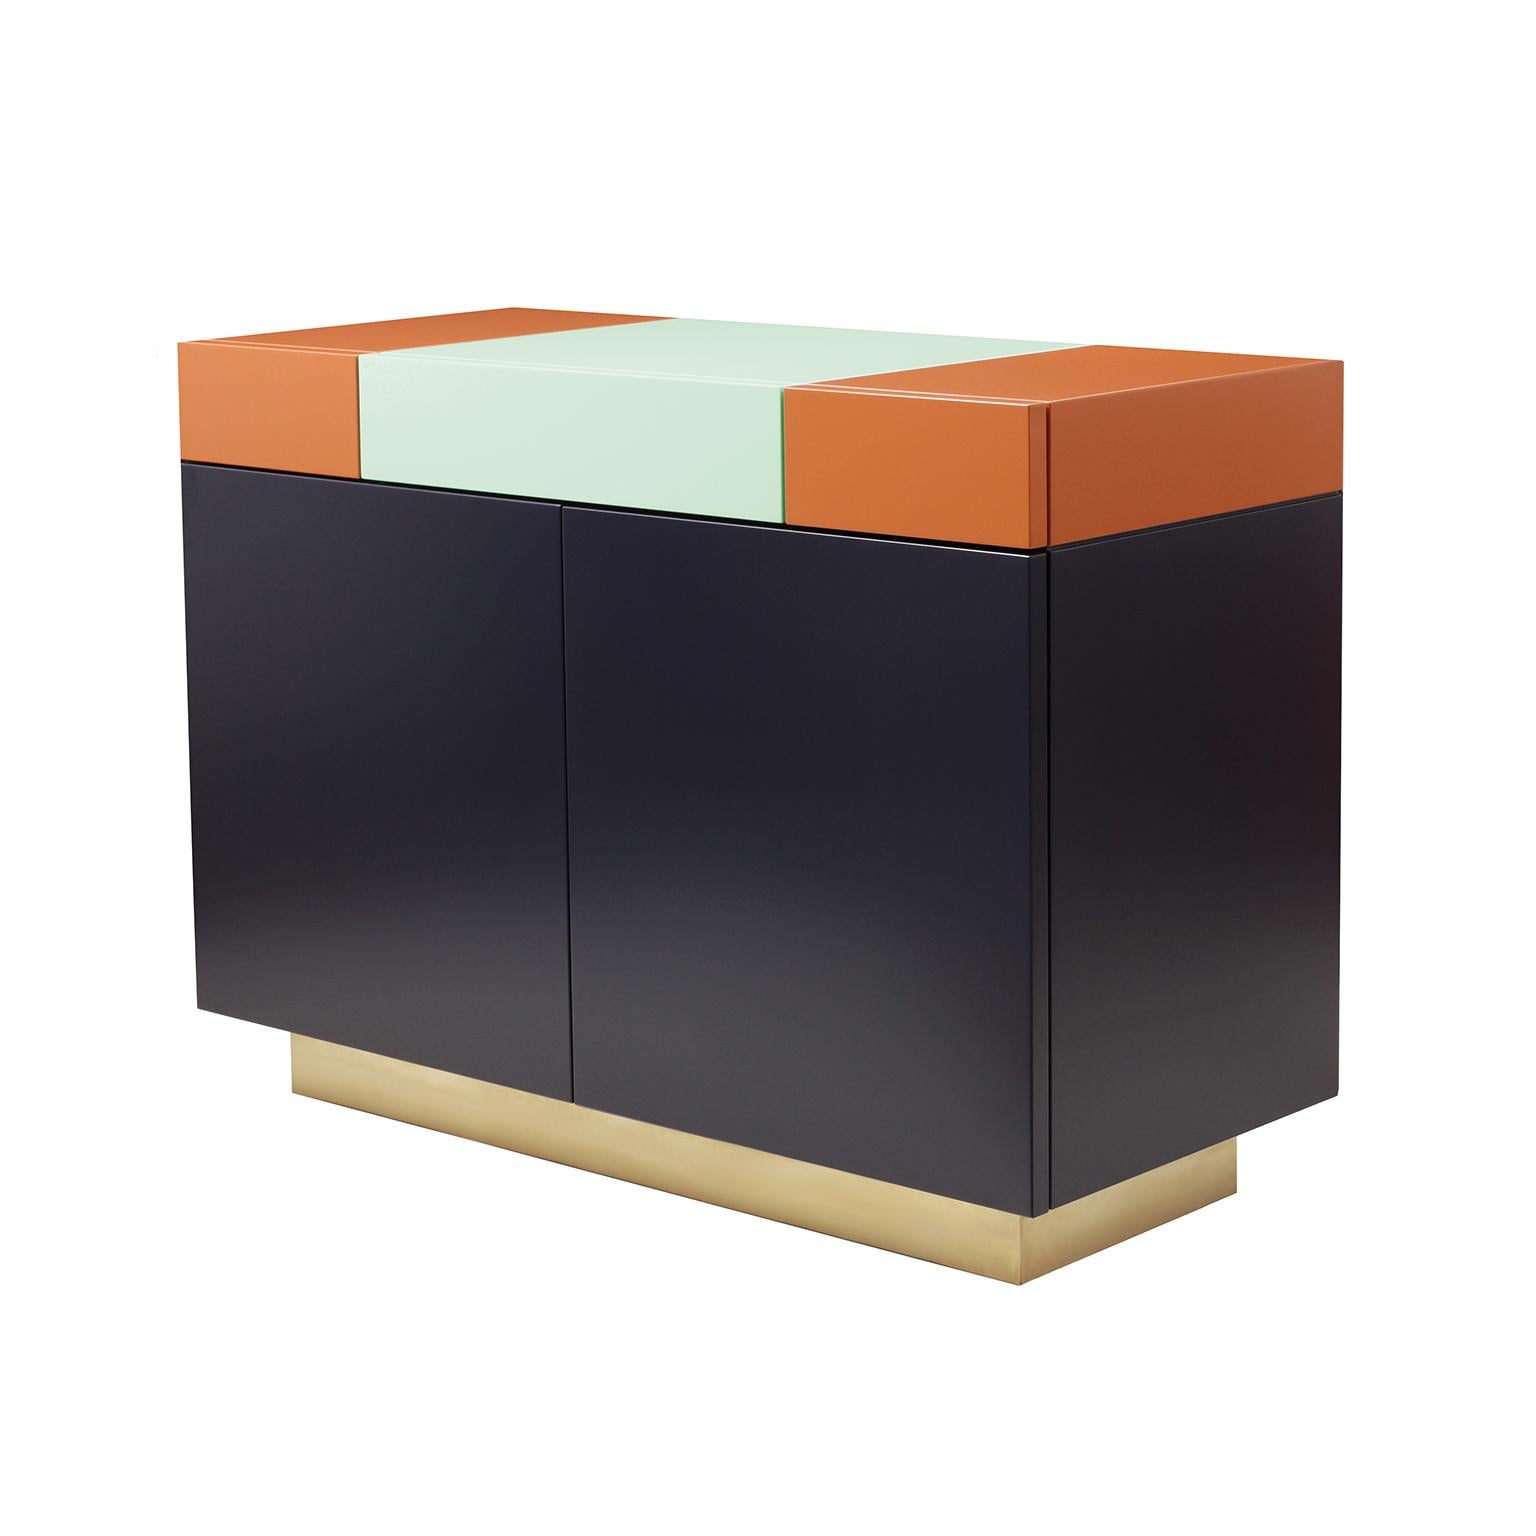 A functional and practical cabinet, based on a discrete elegance, Greta combines a playful geometrical assembling of shapes and colors.
The outside is formed by 3 drawers on top and 2 doors beneath them, all of which with the lacquer color and